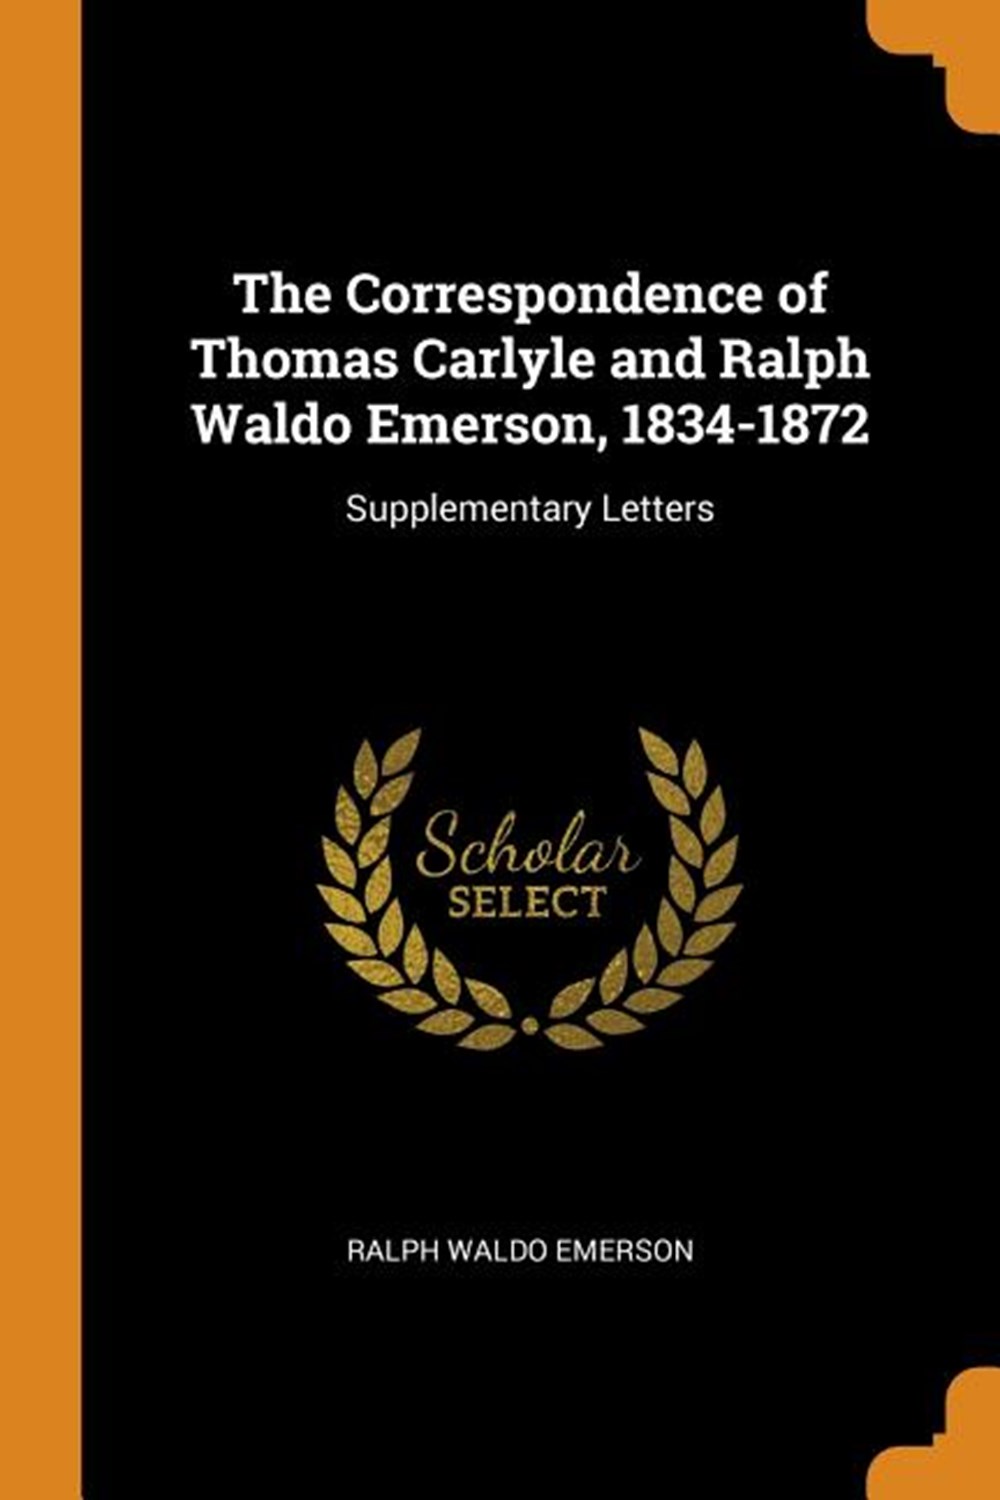 Correspondence of Thomas Carlyle and Ralph Waldo Emerson, 1834-1872: Supplementary Letters